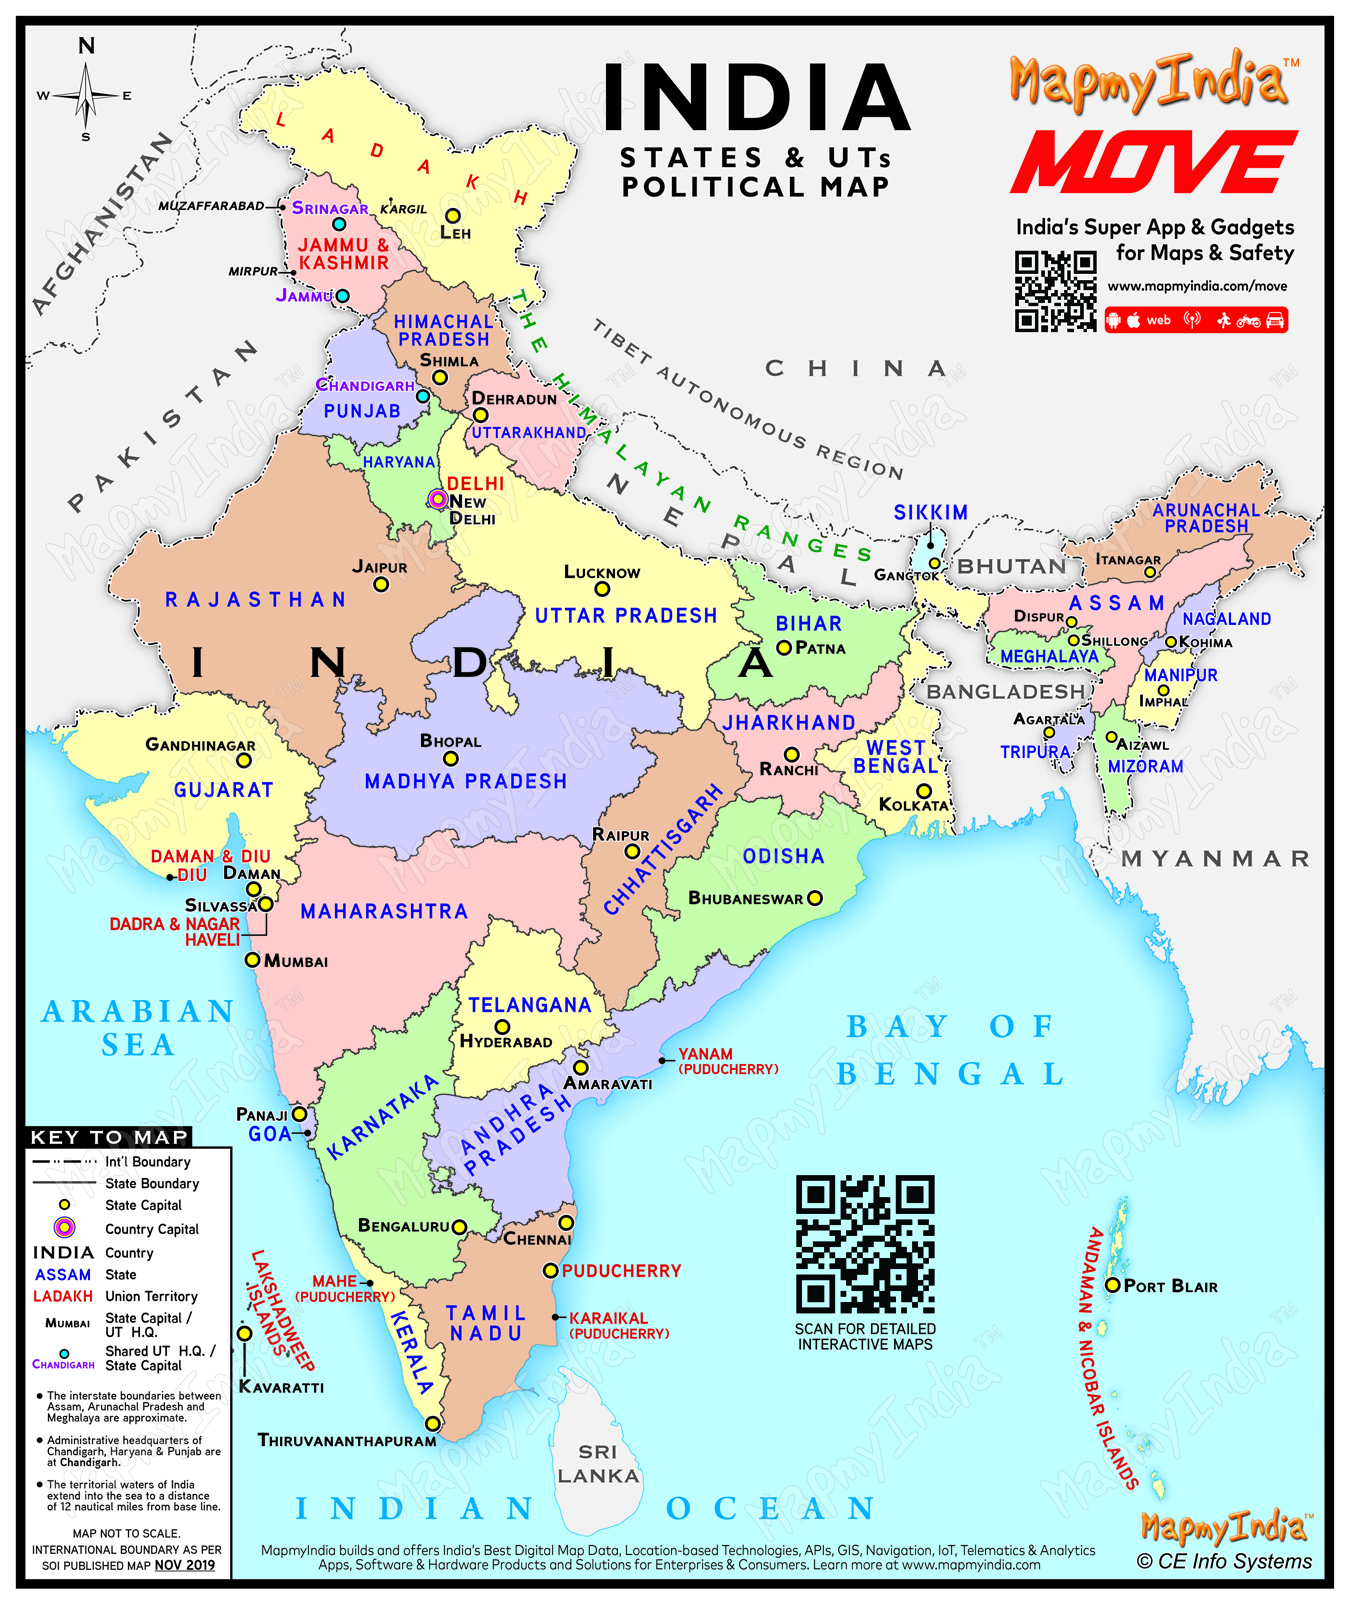 Download The Latest Political Map Of India MapmyIndia